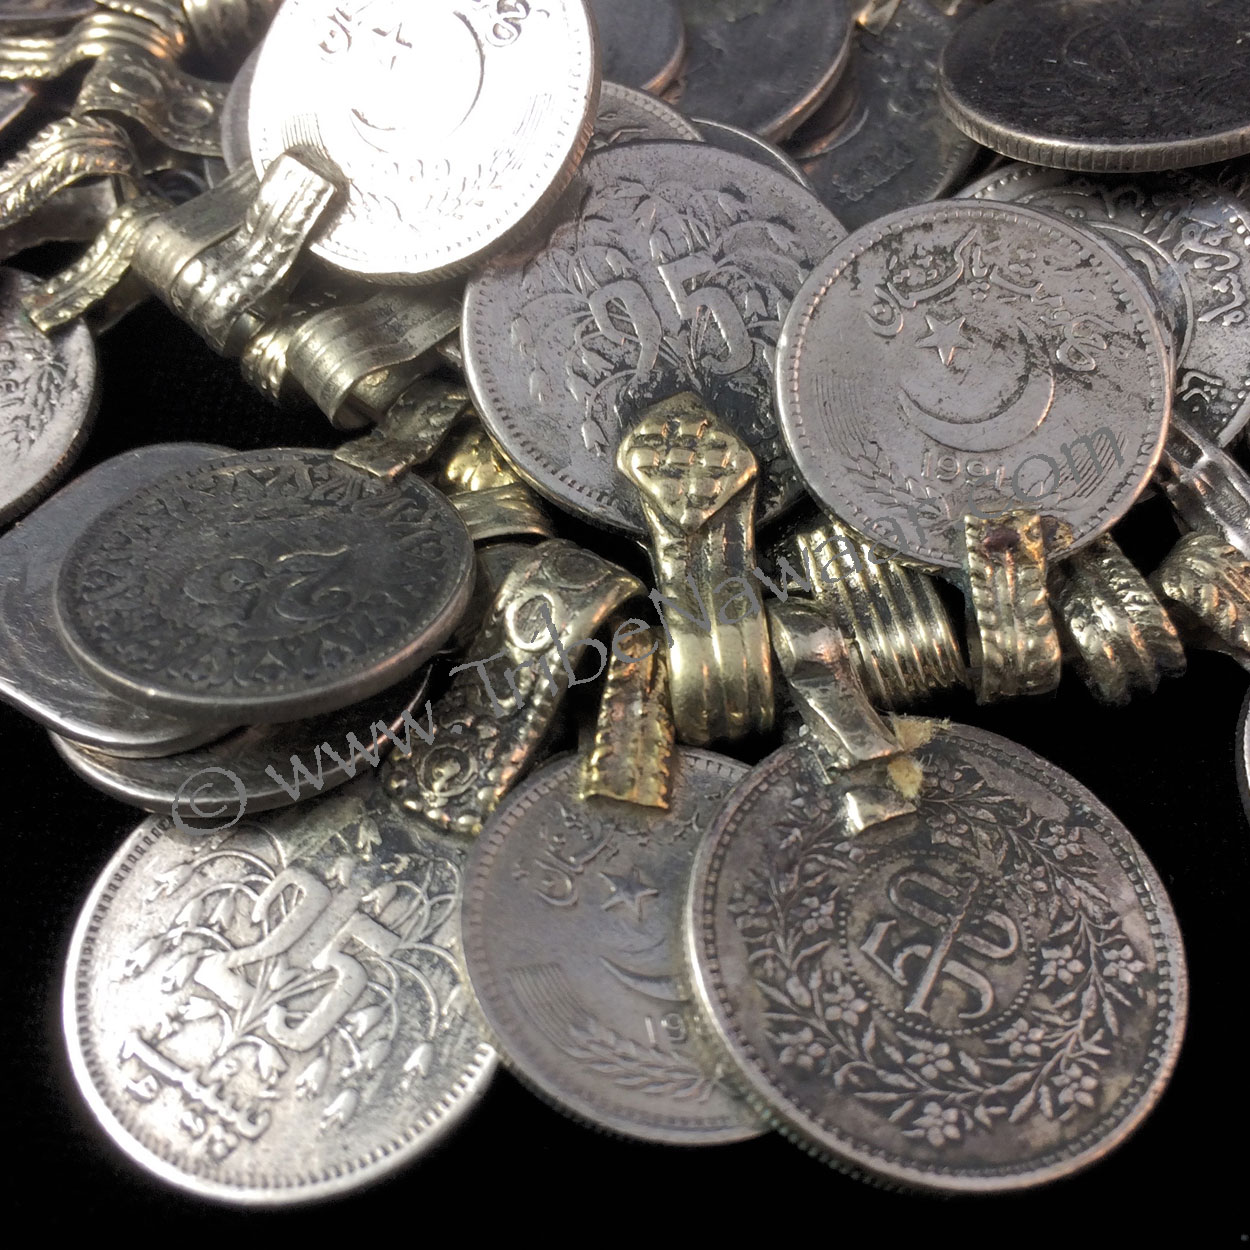 Tribal Coins